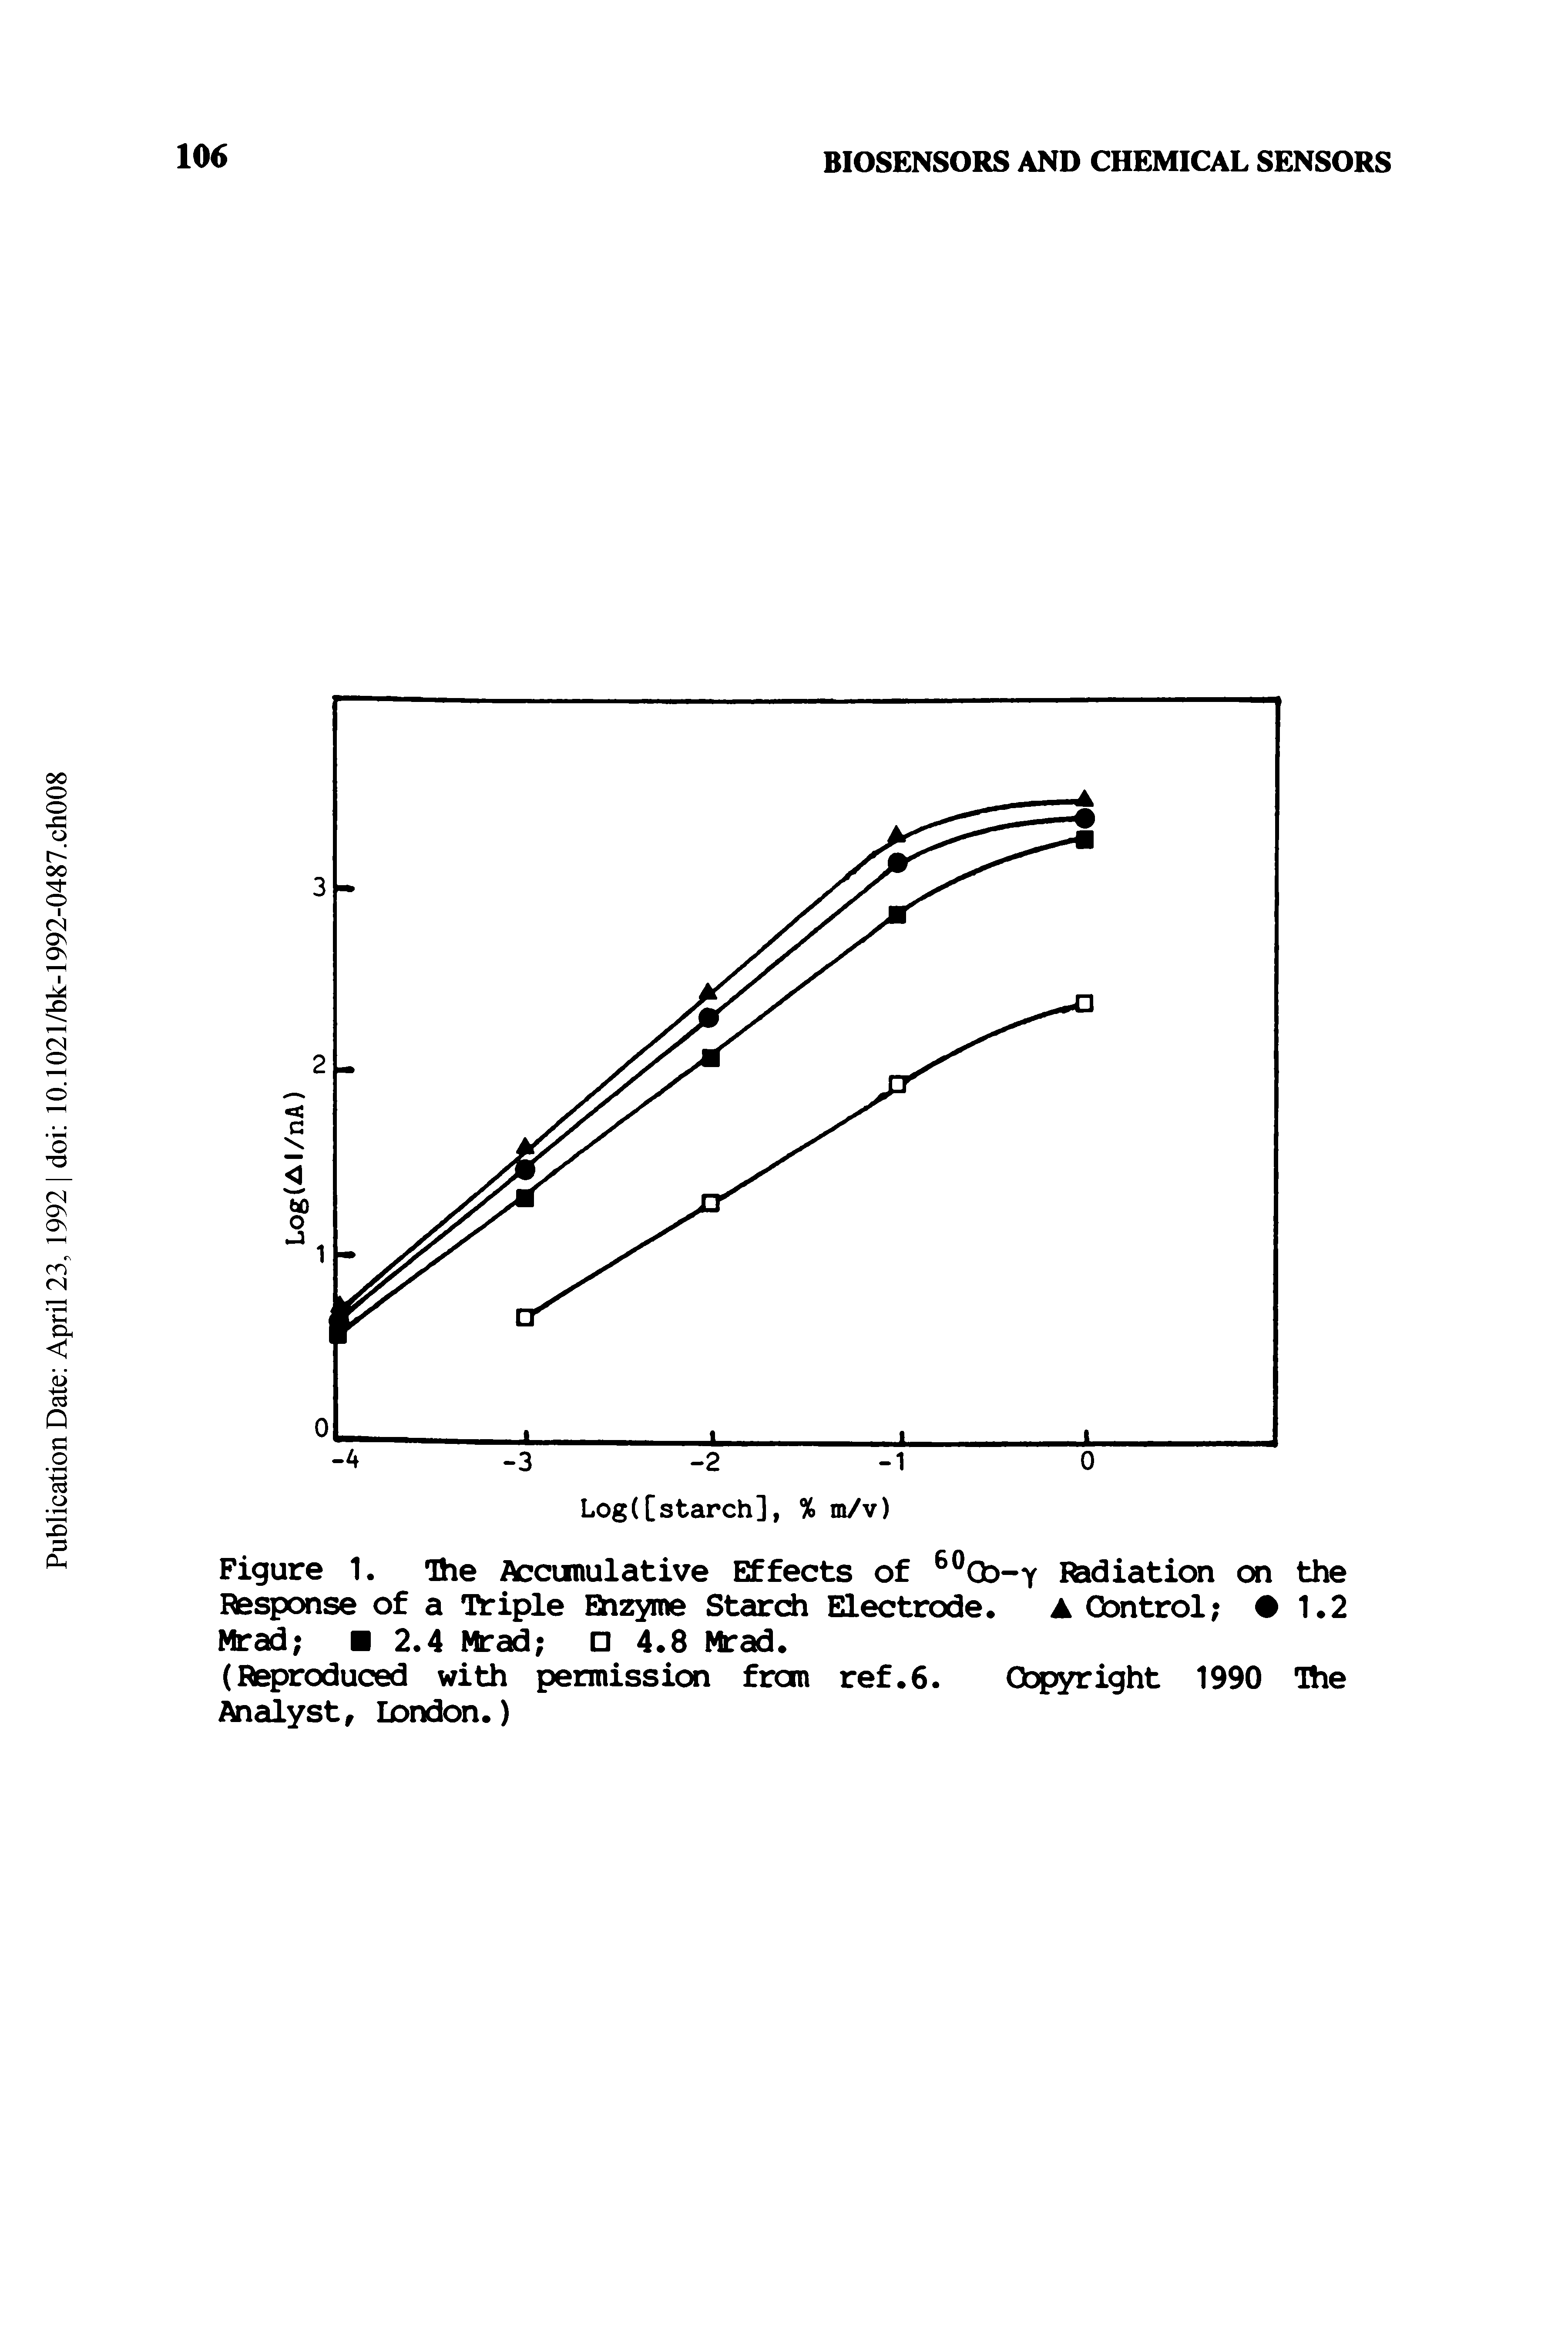 Figure 1. The Accumulative Effects of 60Cb-Y Radiation on the Response of a Triple Enzyme Starch Electrode. Control 1.2 Mrad 2.4 Mrad 4.8 Mrad.